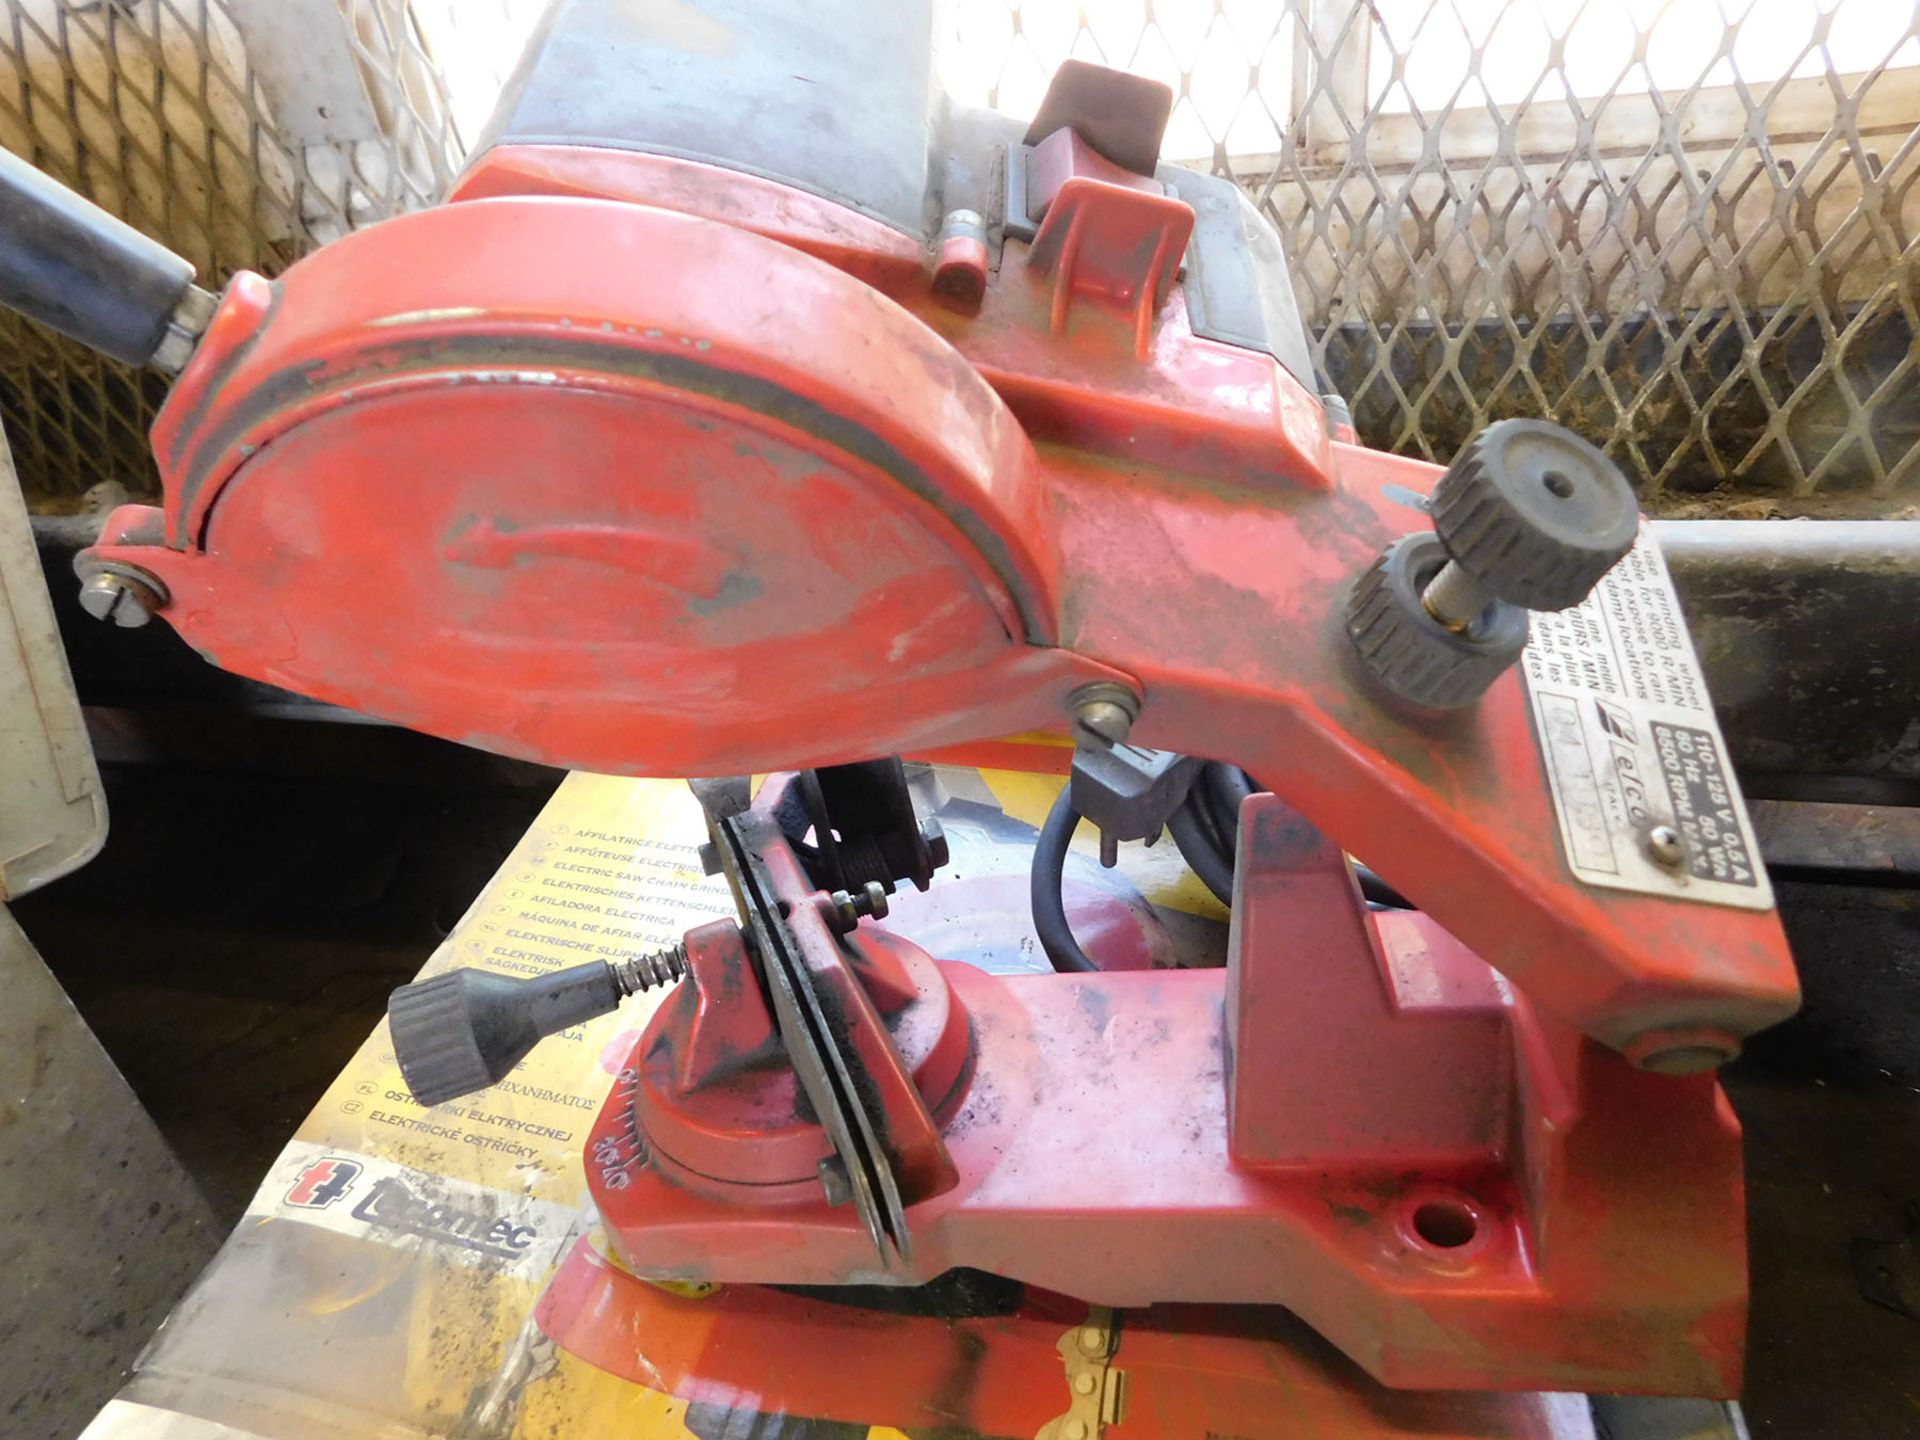 MID JOLLY ELECTRIC SAW CHAIN GRINDER; S/N 041989